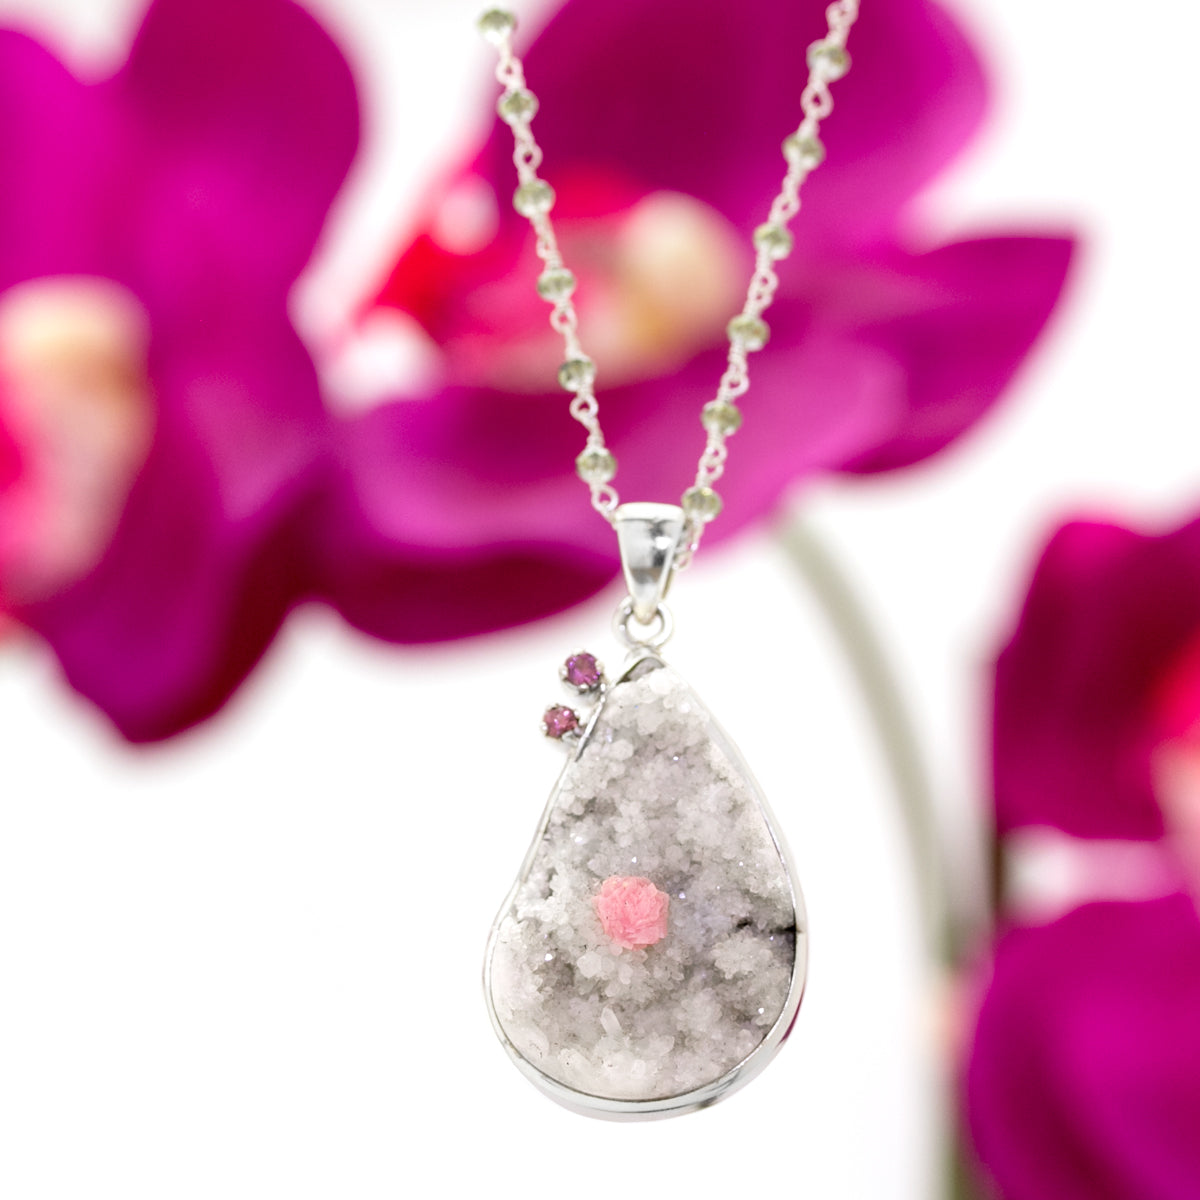 Flowering Agate and Rhodocrosite Druzy  (Drusy) Necklace